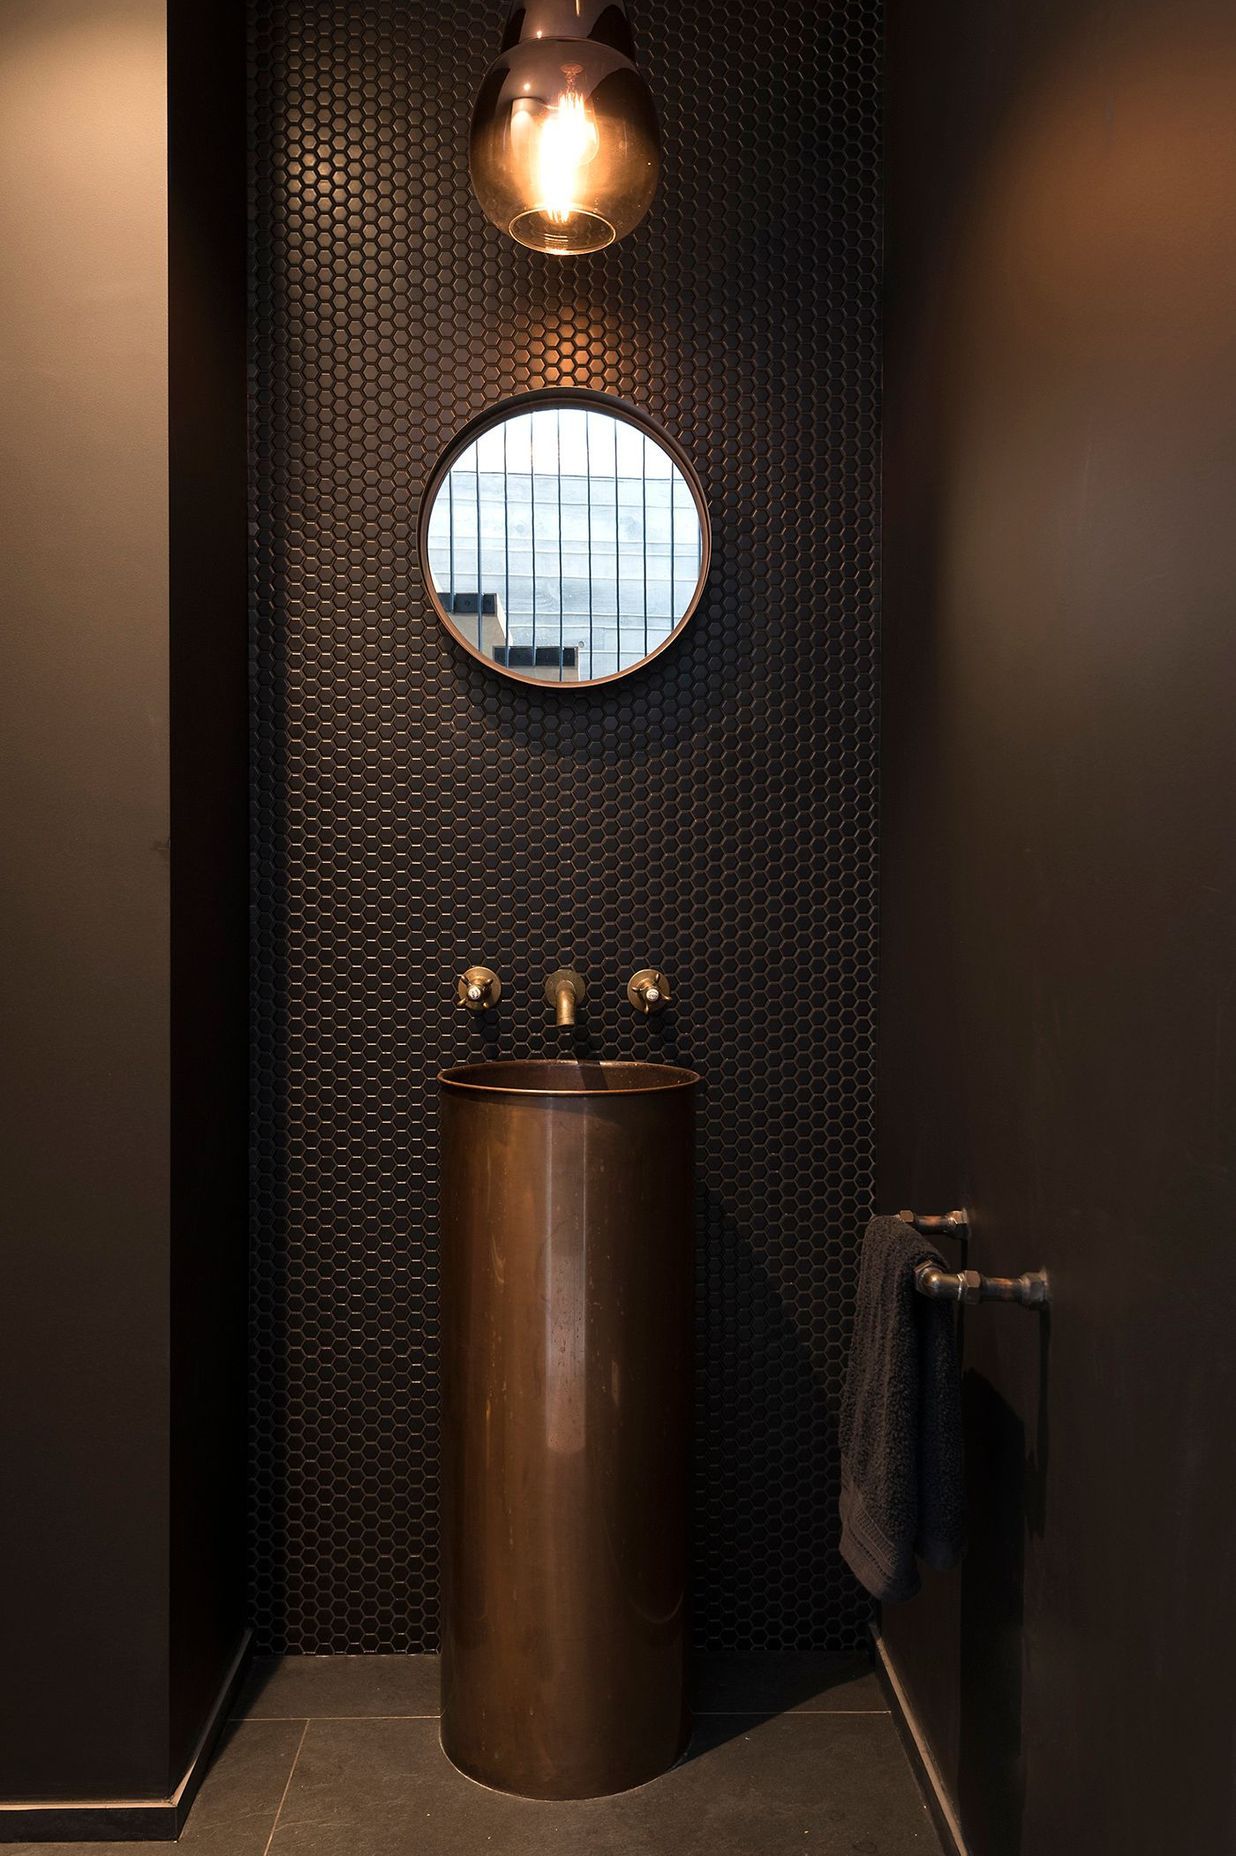 Tiling, tapware and pedestal basin in copper create a warm and elegant bathroom.